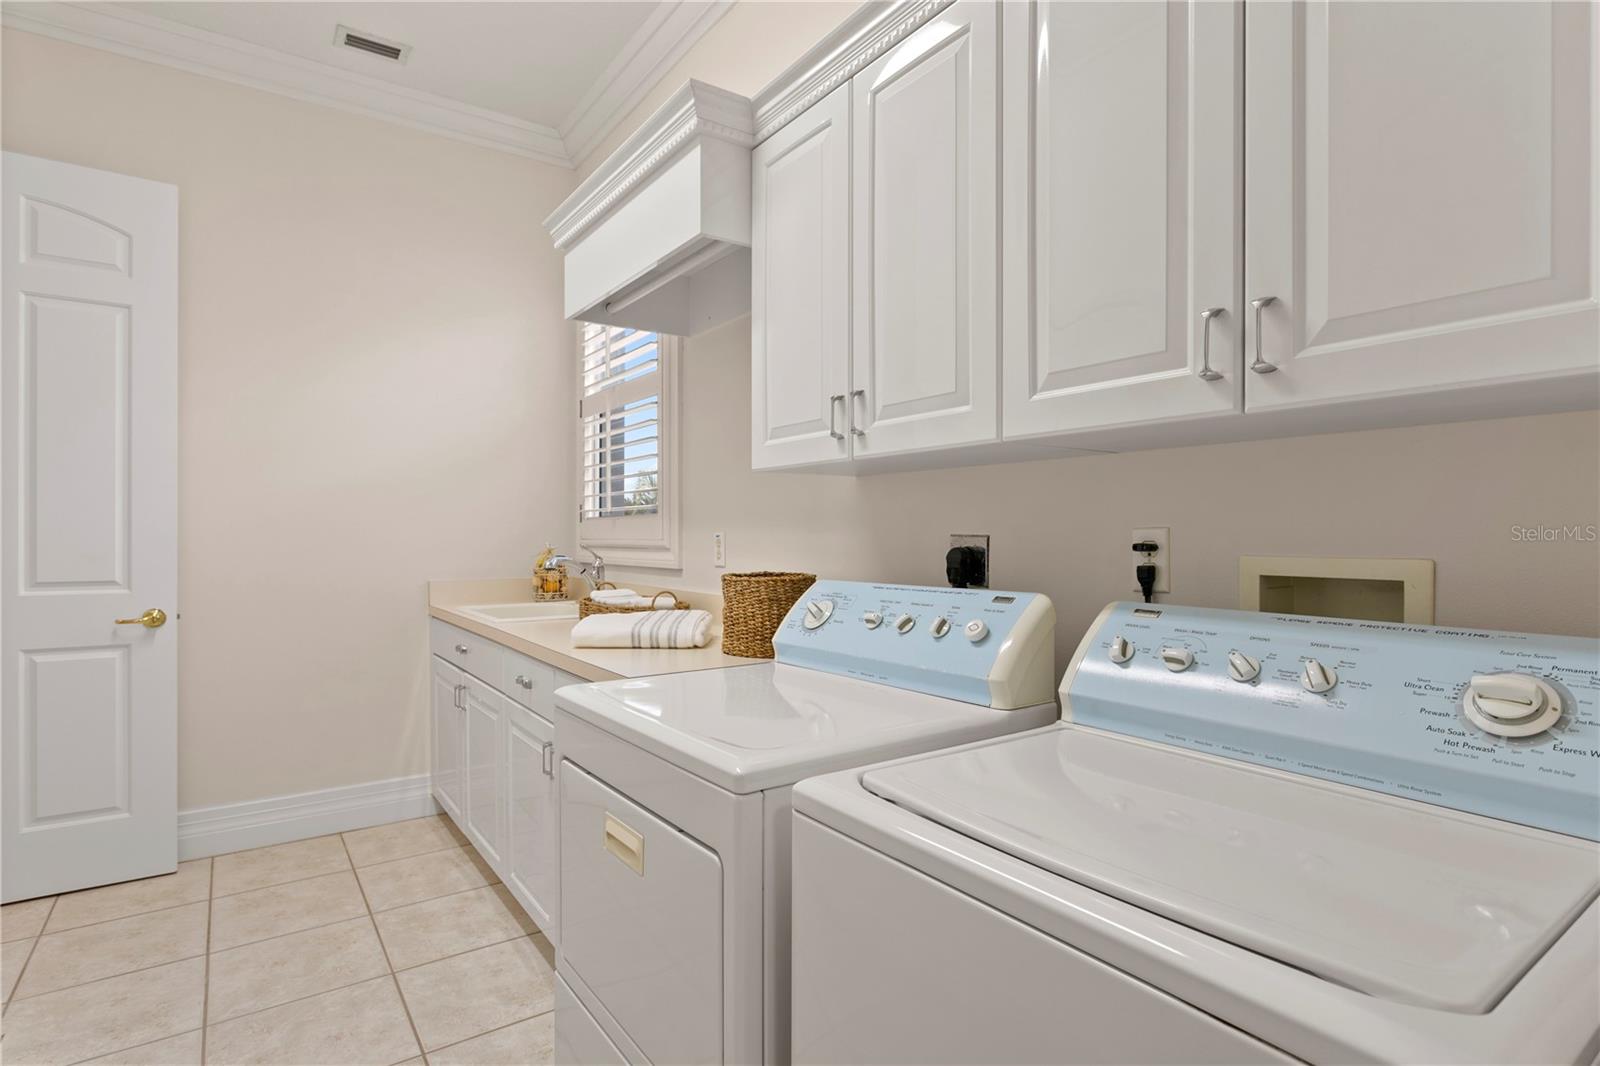 Walk in Laundry Room with Wet Sink